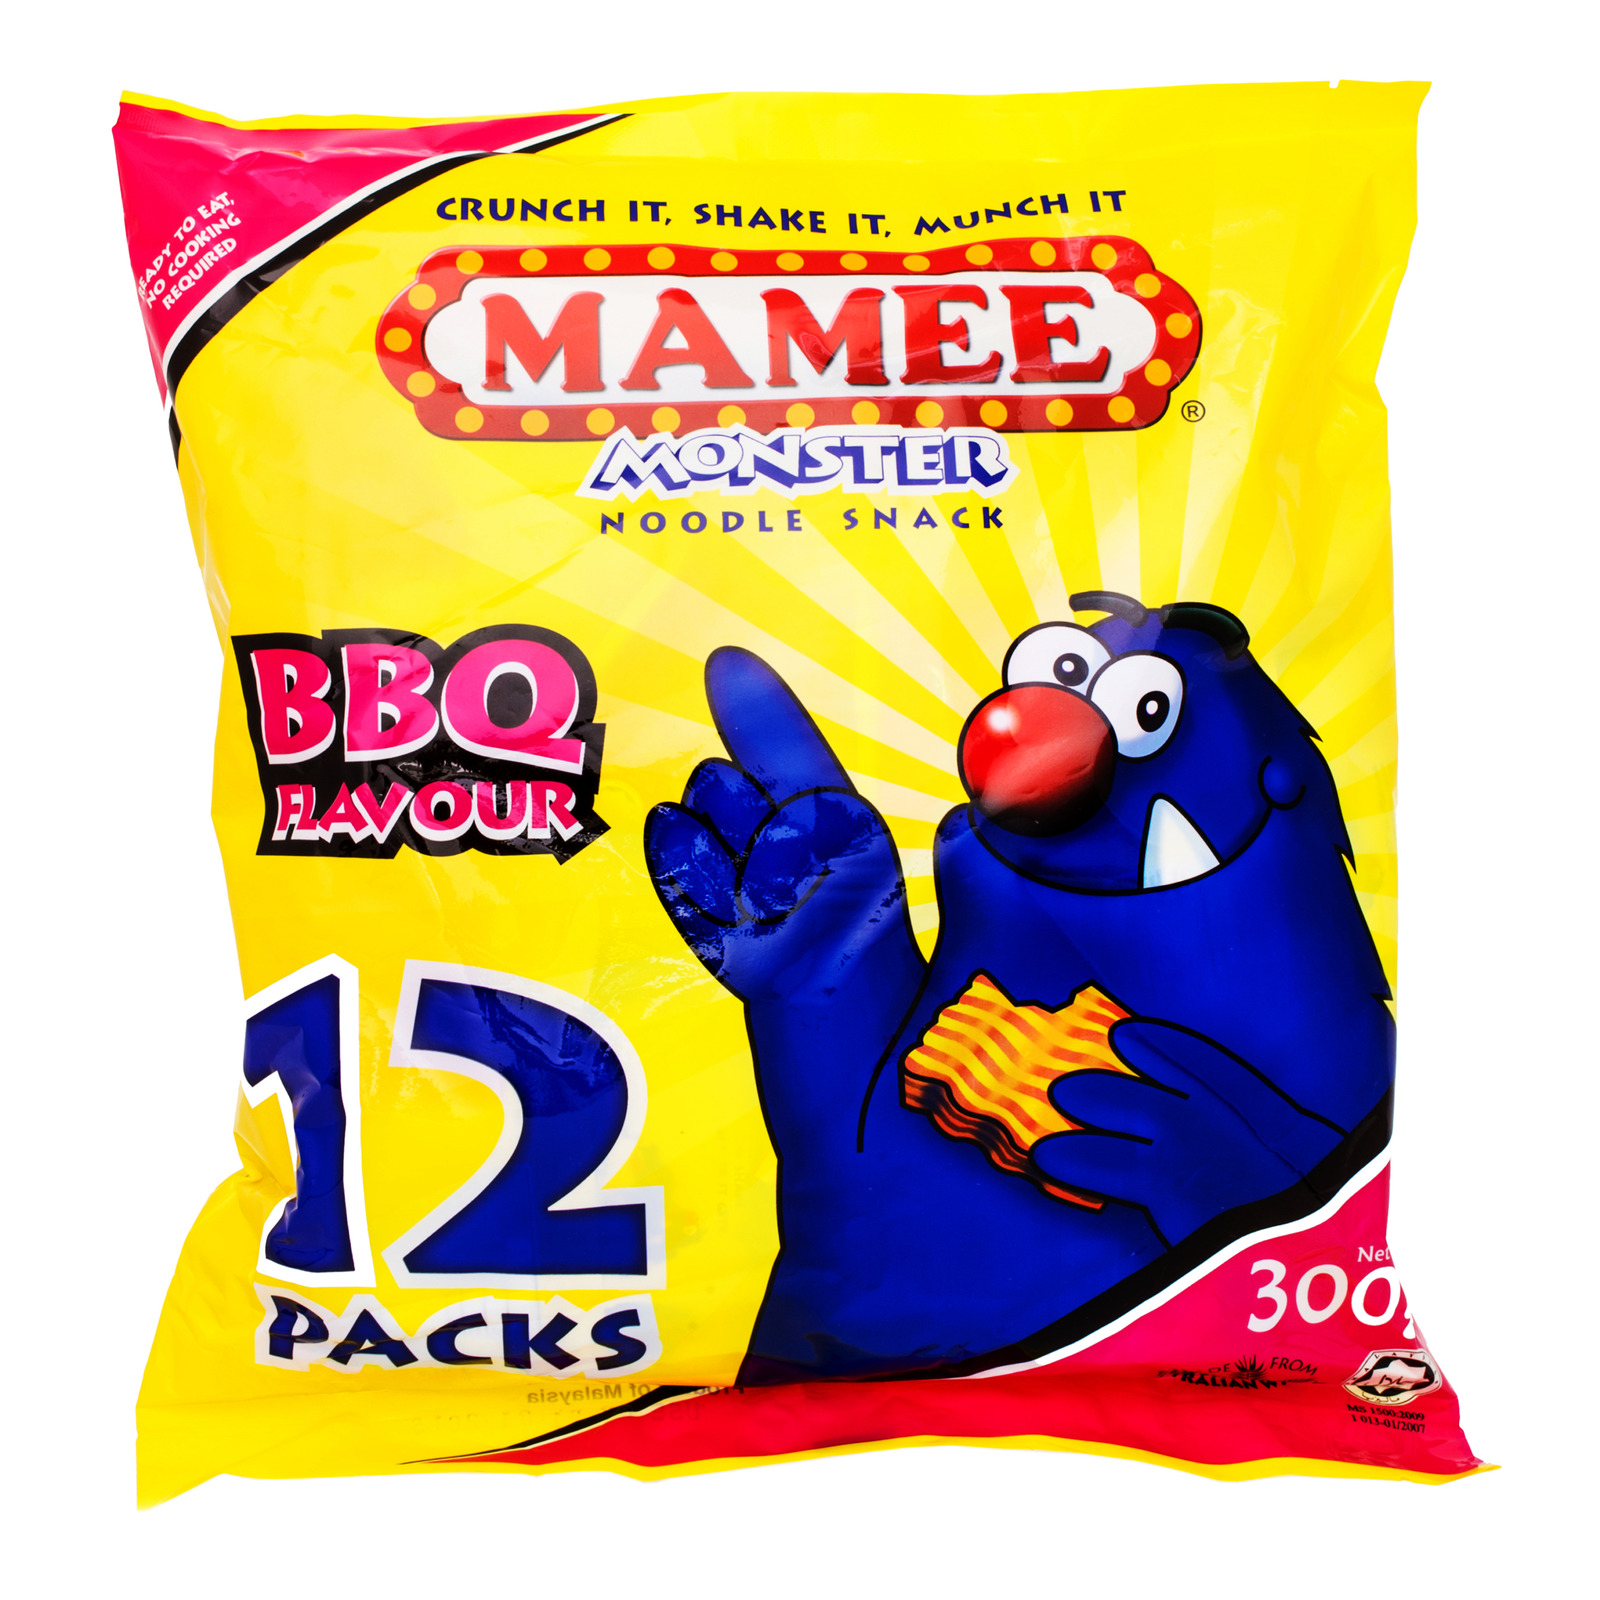 Mamee Noodle Snack - BBQ